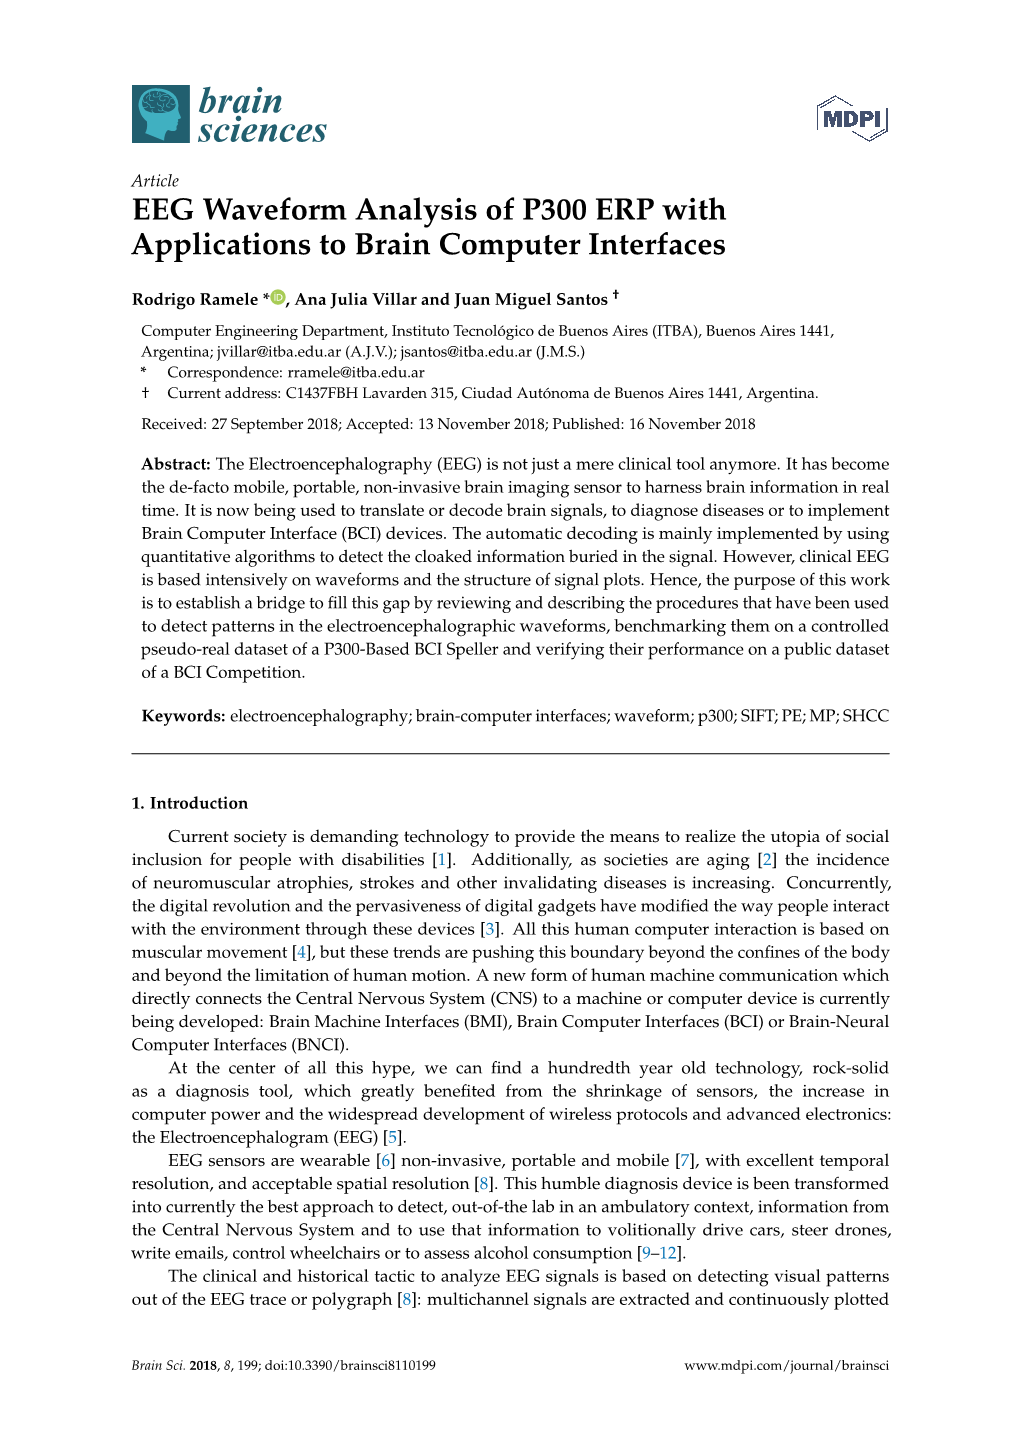 EEG Waveform Analysis of P300 ERP with Applications to Brain Computer Interfaces